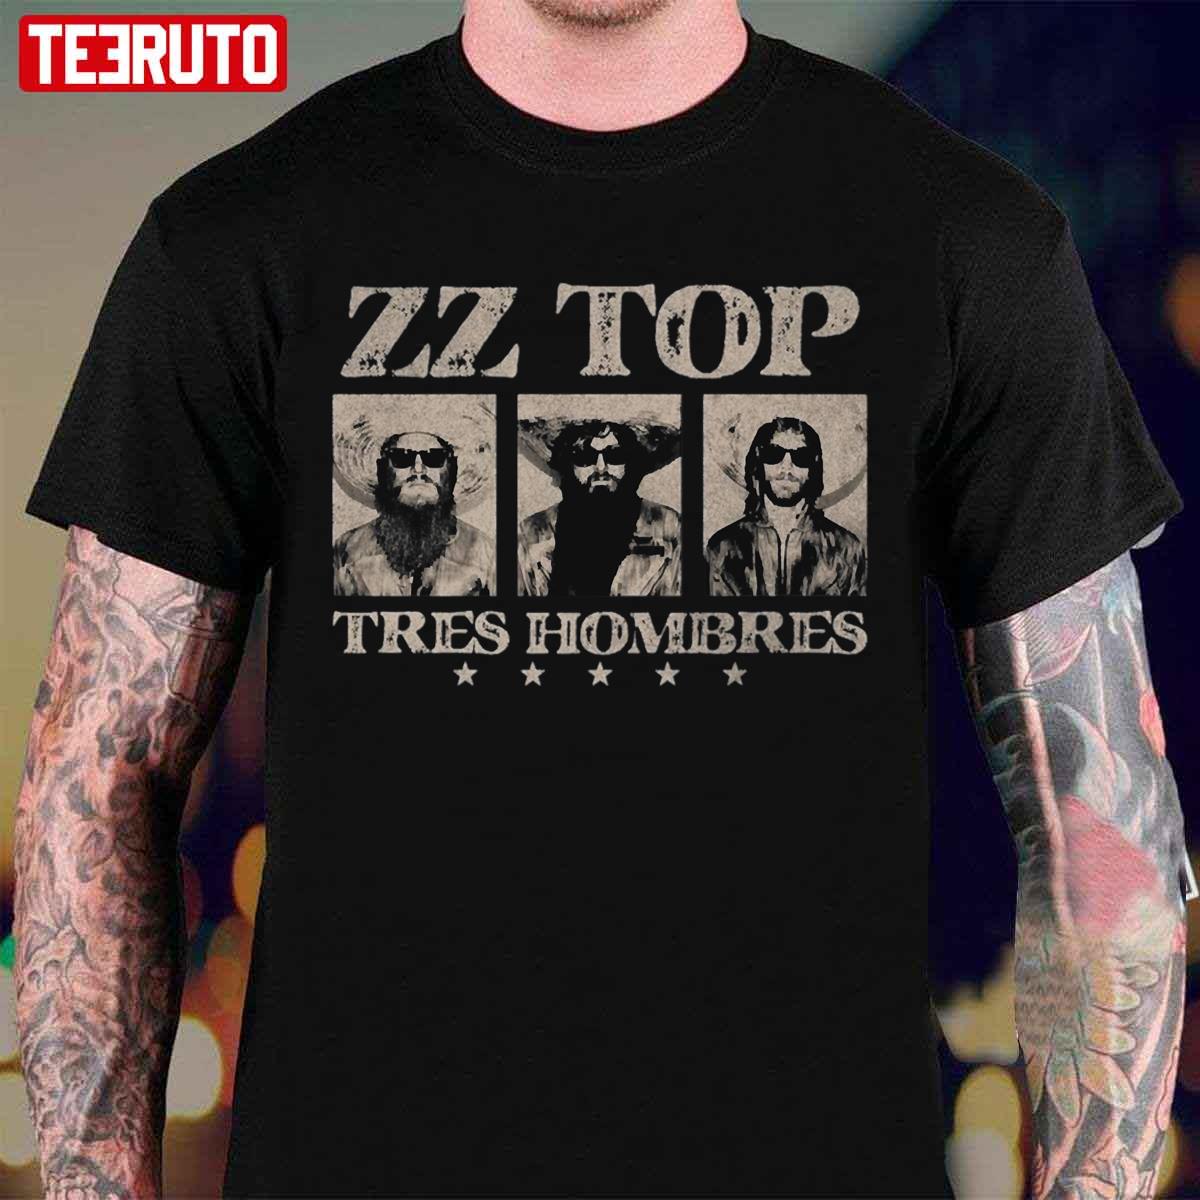 The Zz Top American Rock Band Unisex T-Shirt